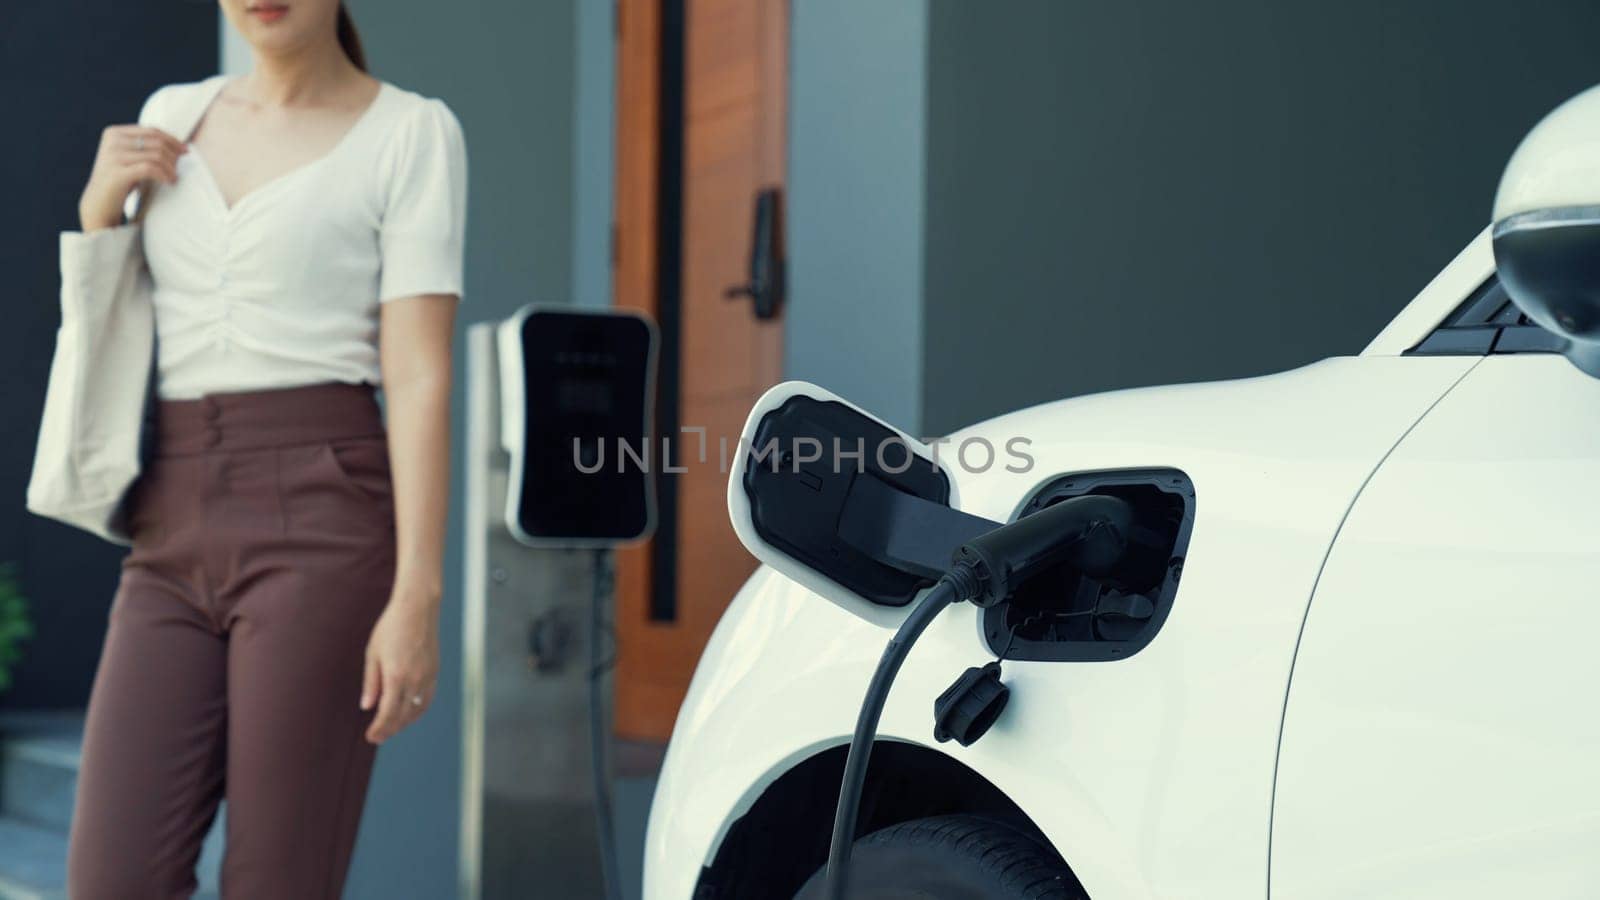 A woman unplugs the electric vehicle's charger at his residence. Concept of the use of electric vehicles in a progressive lifestyle contributes to a clean and healthy environment.